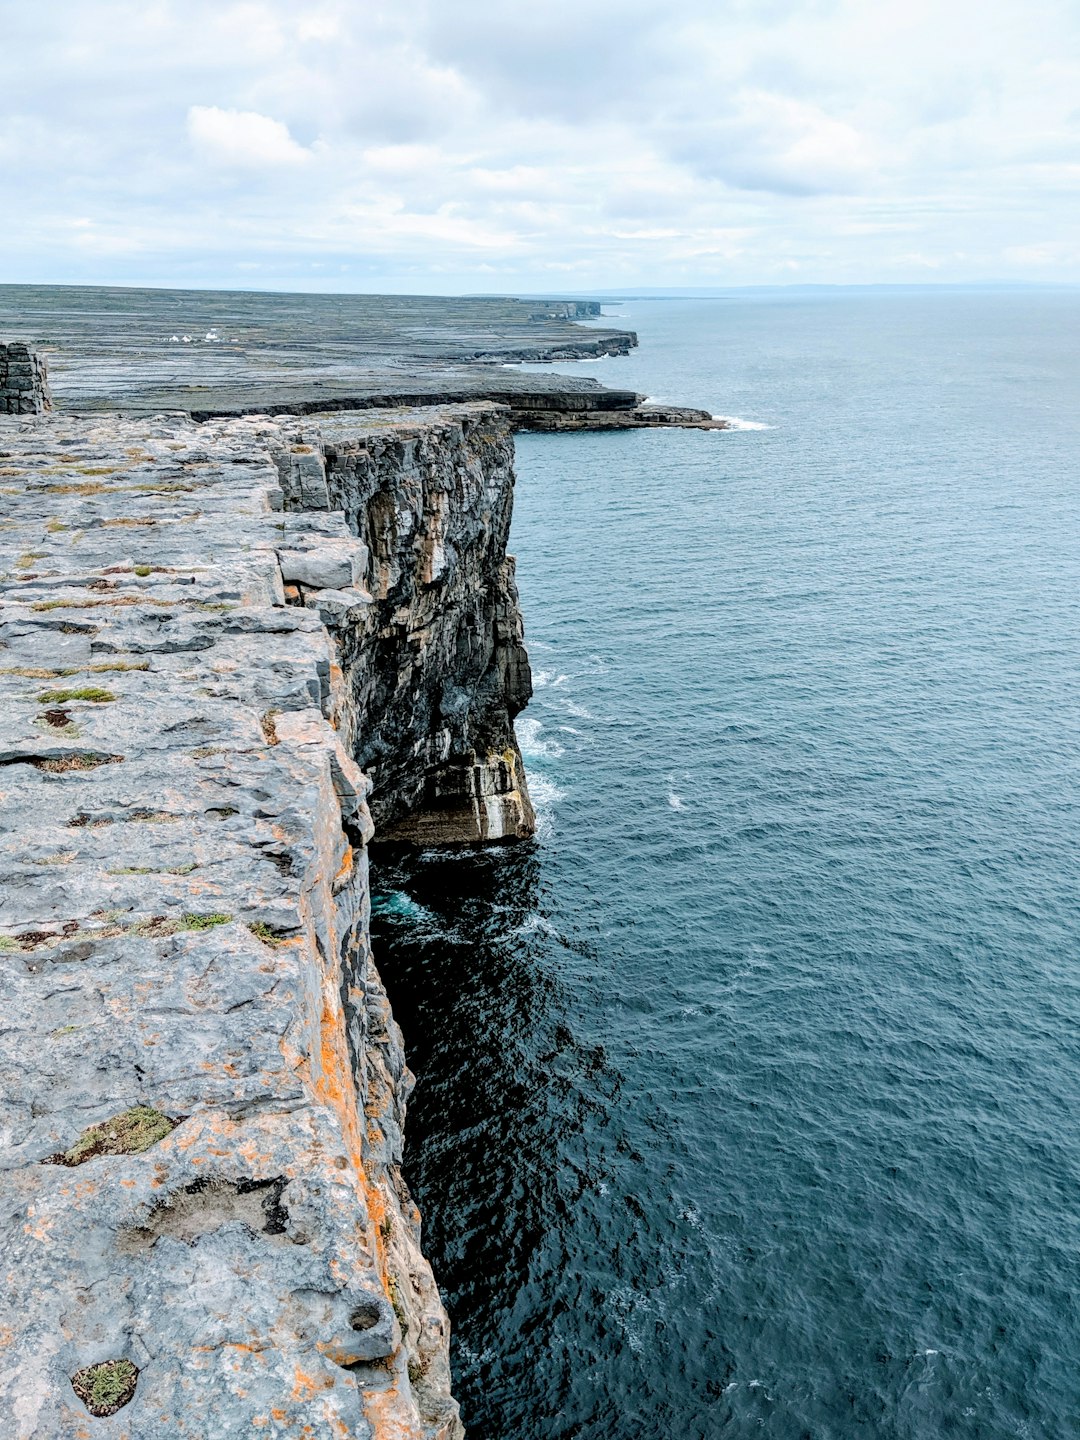 photo of View of Inishmore Coastline Cliff near Cliffs of Moher